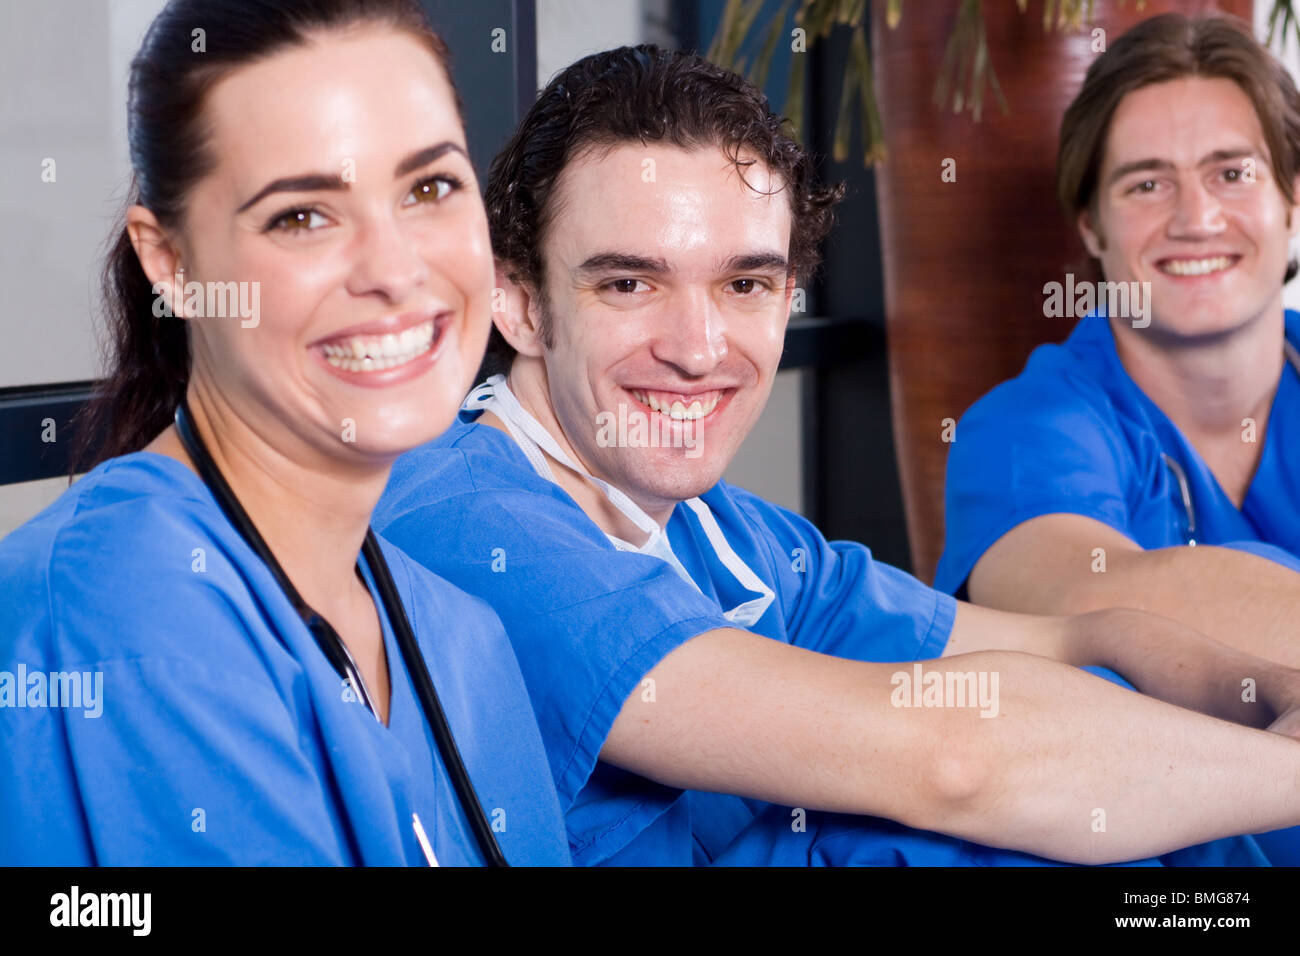 group of young doctors and nurses relaxing in hospital Stock Photo